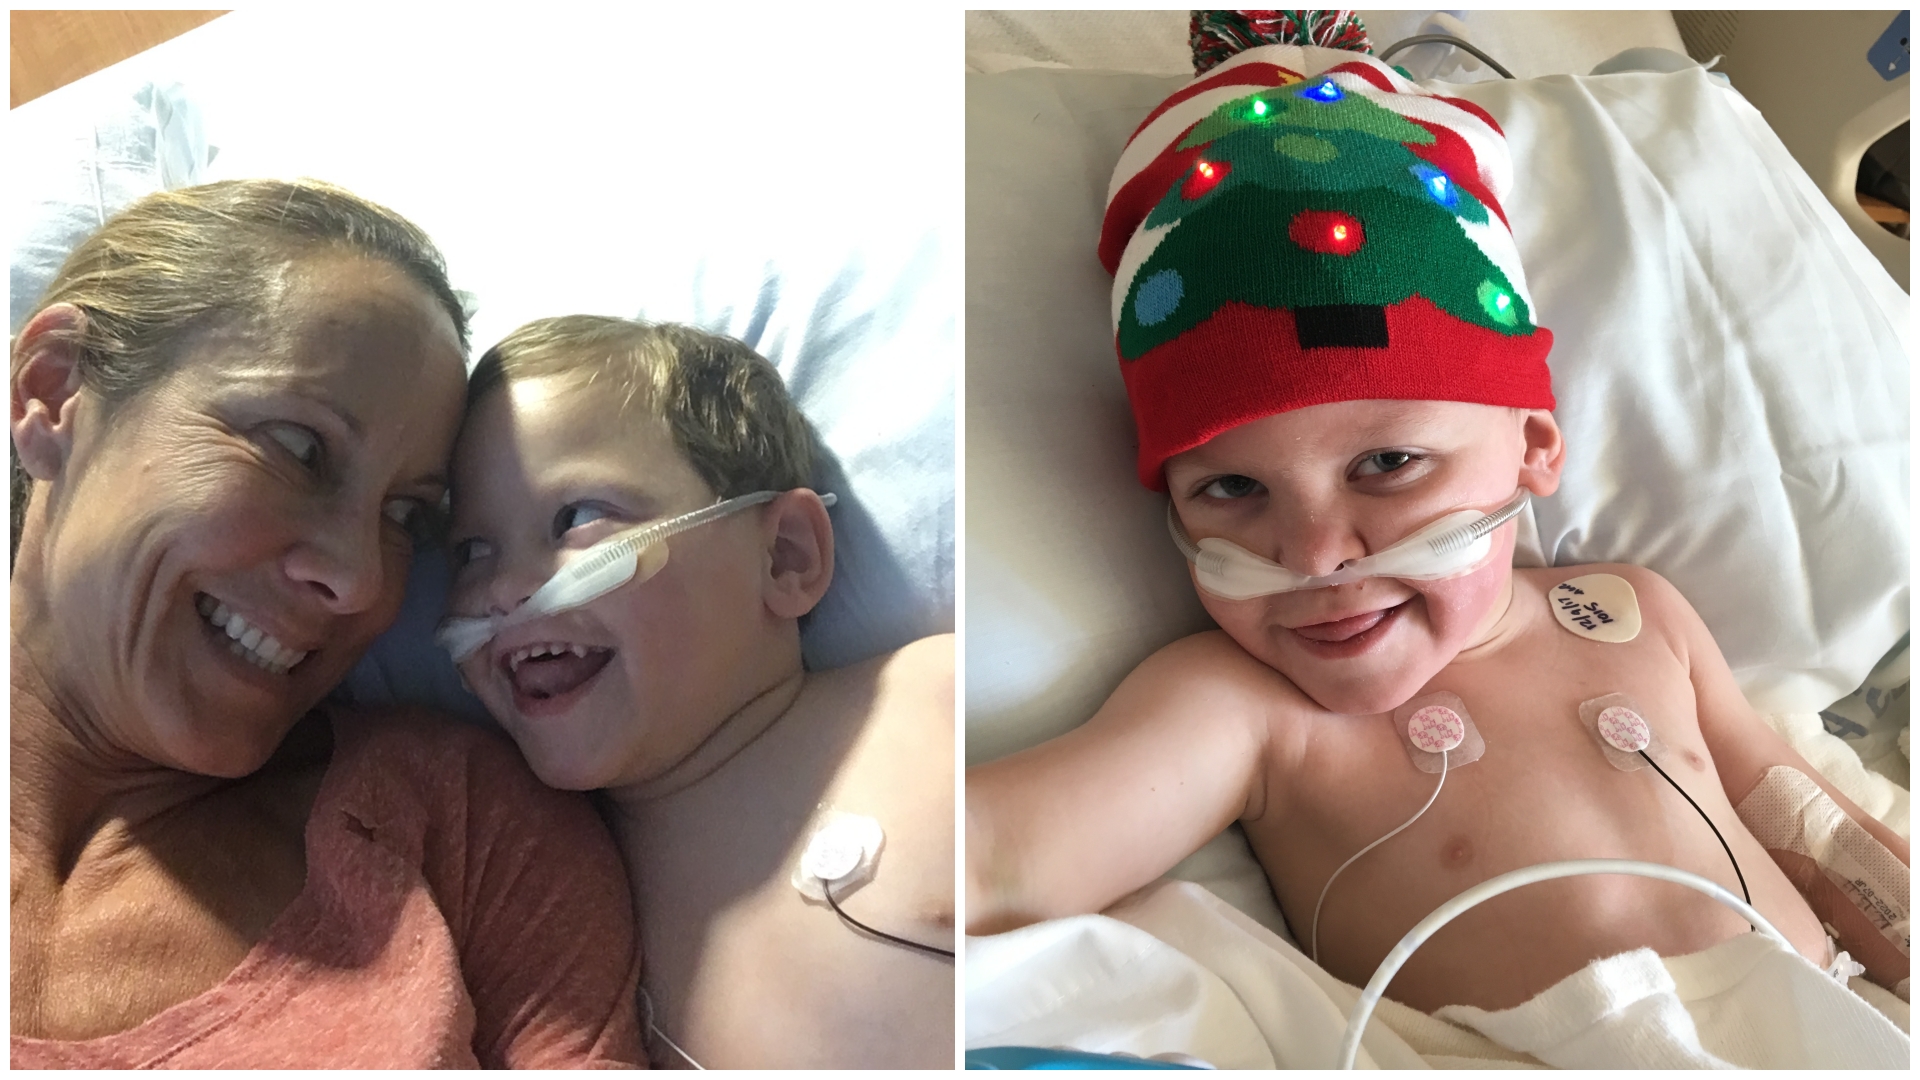 Even after trying several anti-epileptic medications, Jake’s seizures persisted. But when the team at Atrium Health Levine Children’s suggested he try the ketogenic diet, everything quickly changed for this happy-go-lucky 5-year old. 